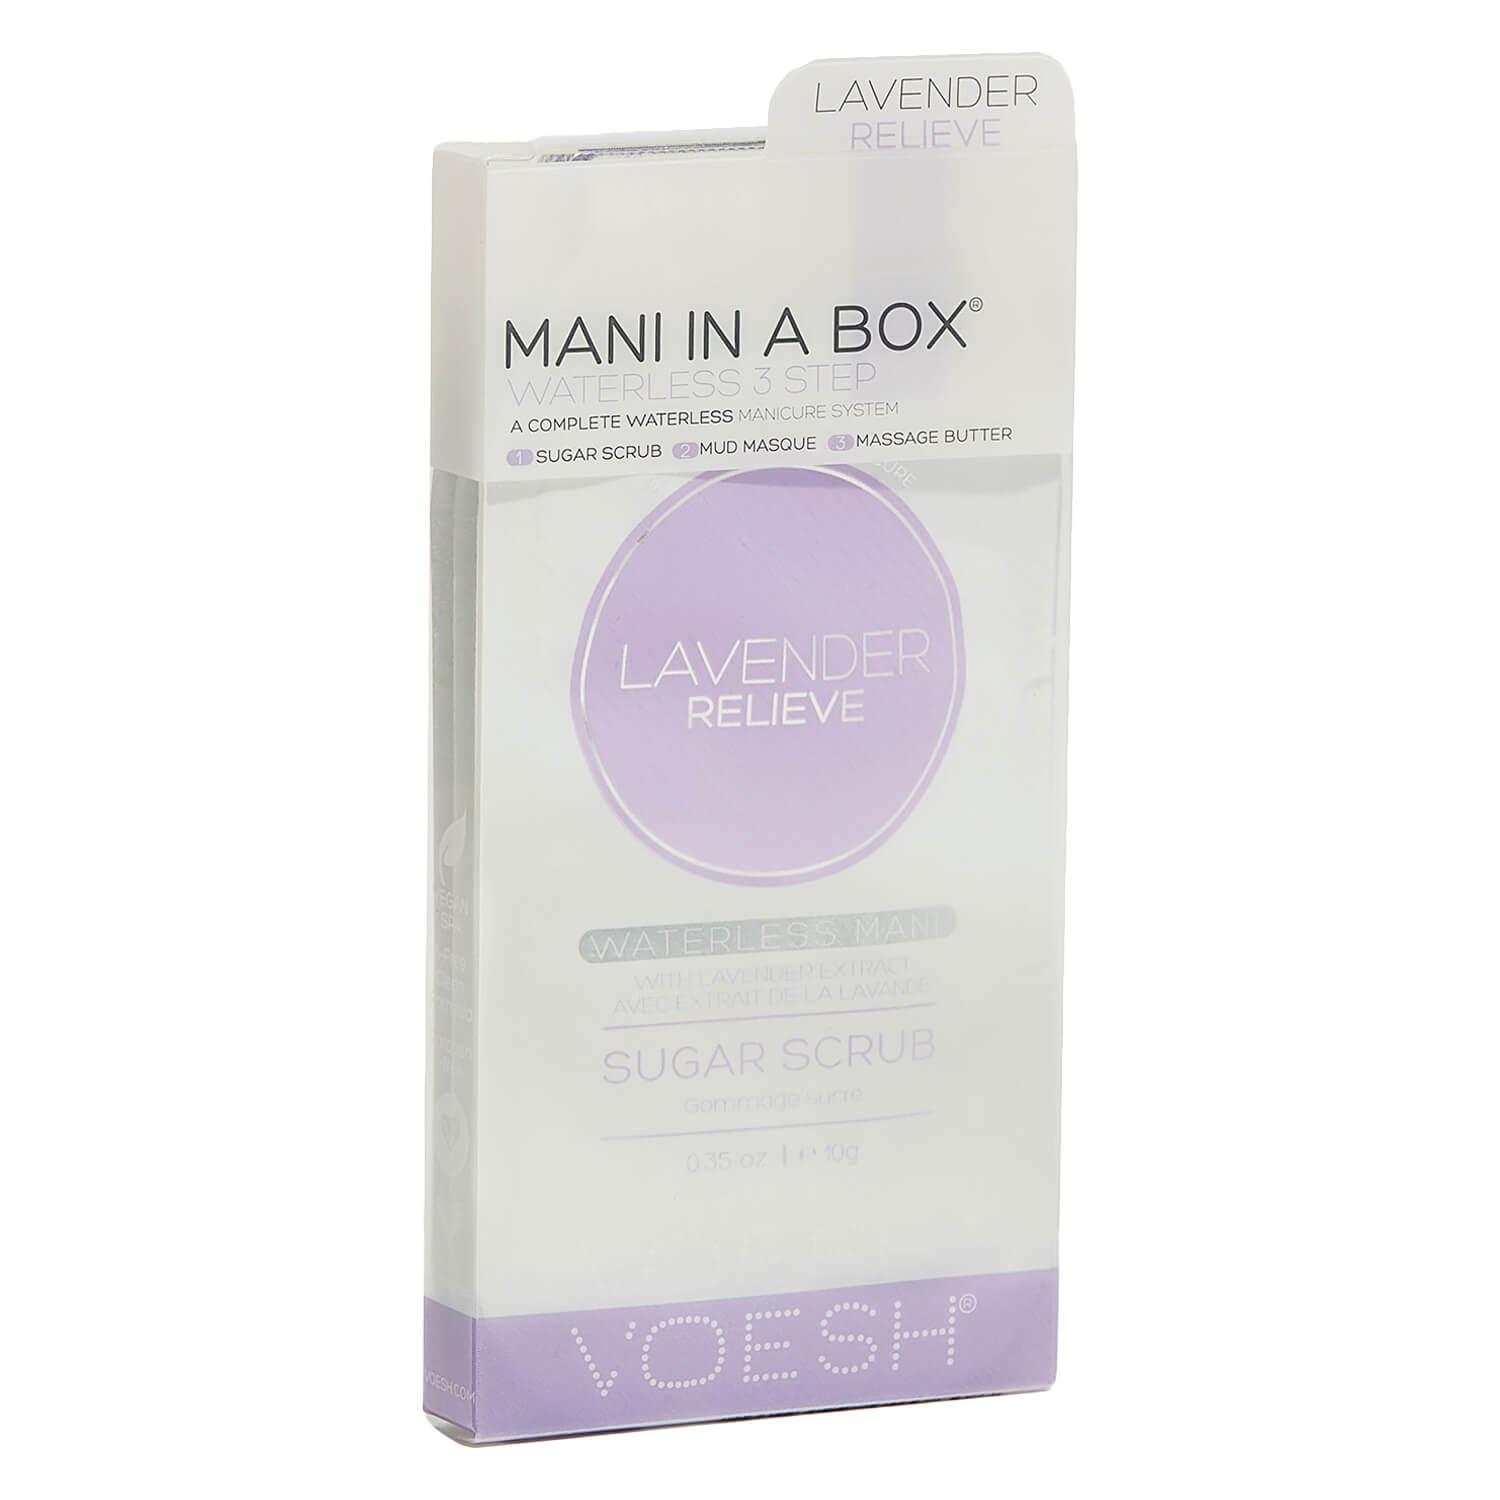 VOESH New York - Mani In A Box 3 Step Lavender